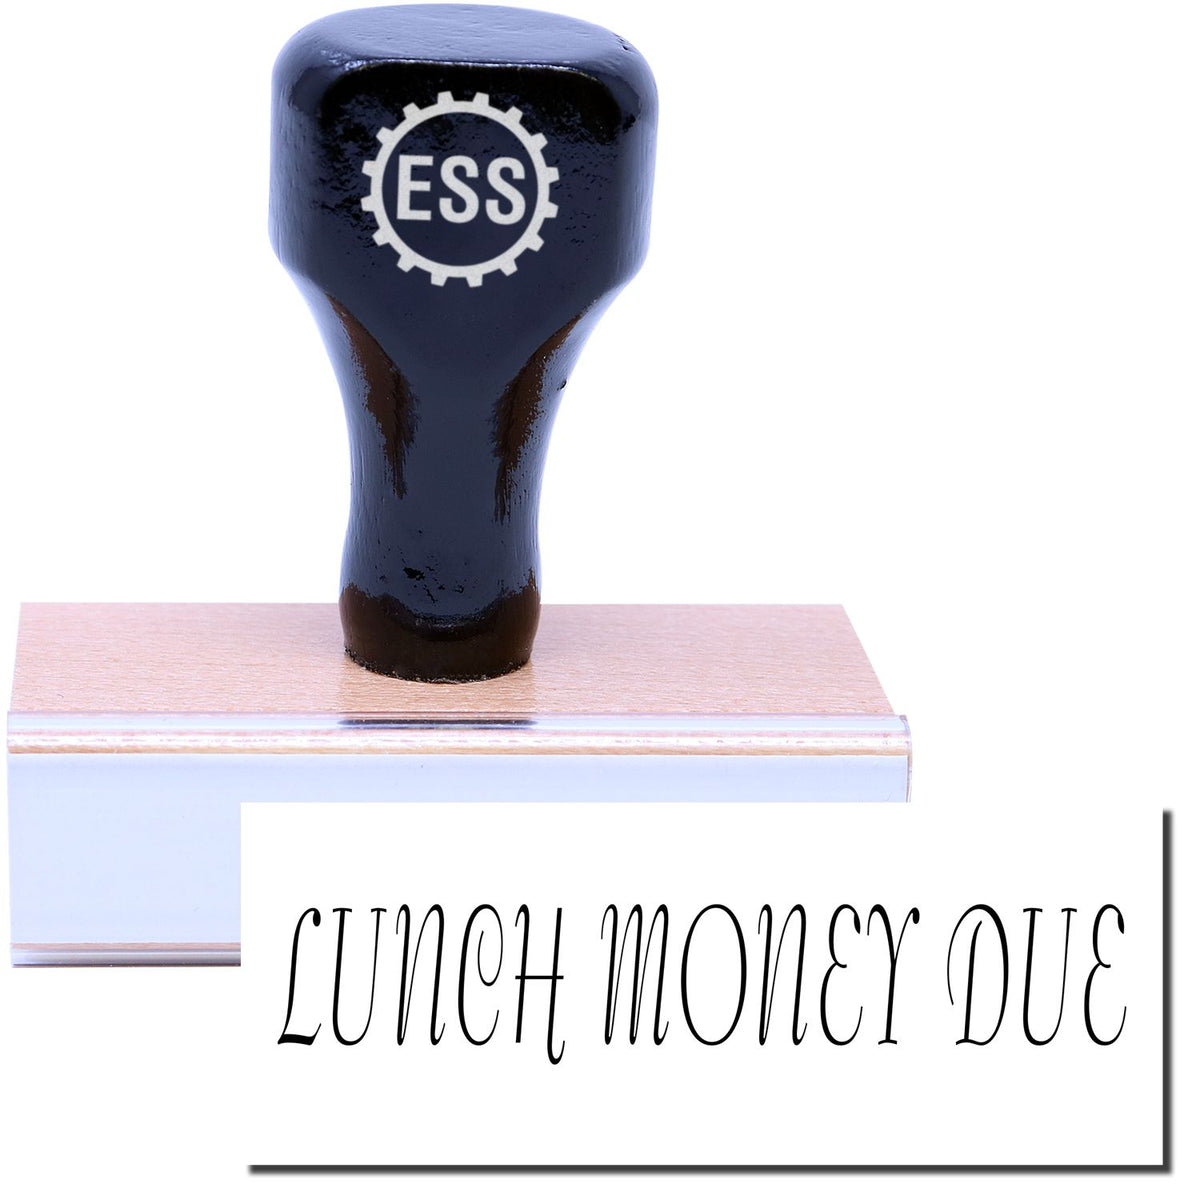 A stock office rubber stamp with a stamped image showing how the text &quot;LUNCH MONEY DUE&quot; is displayed after stamping.